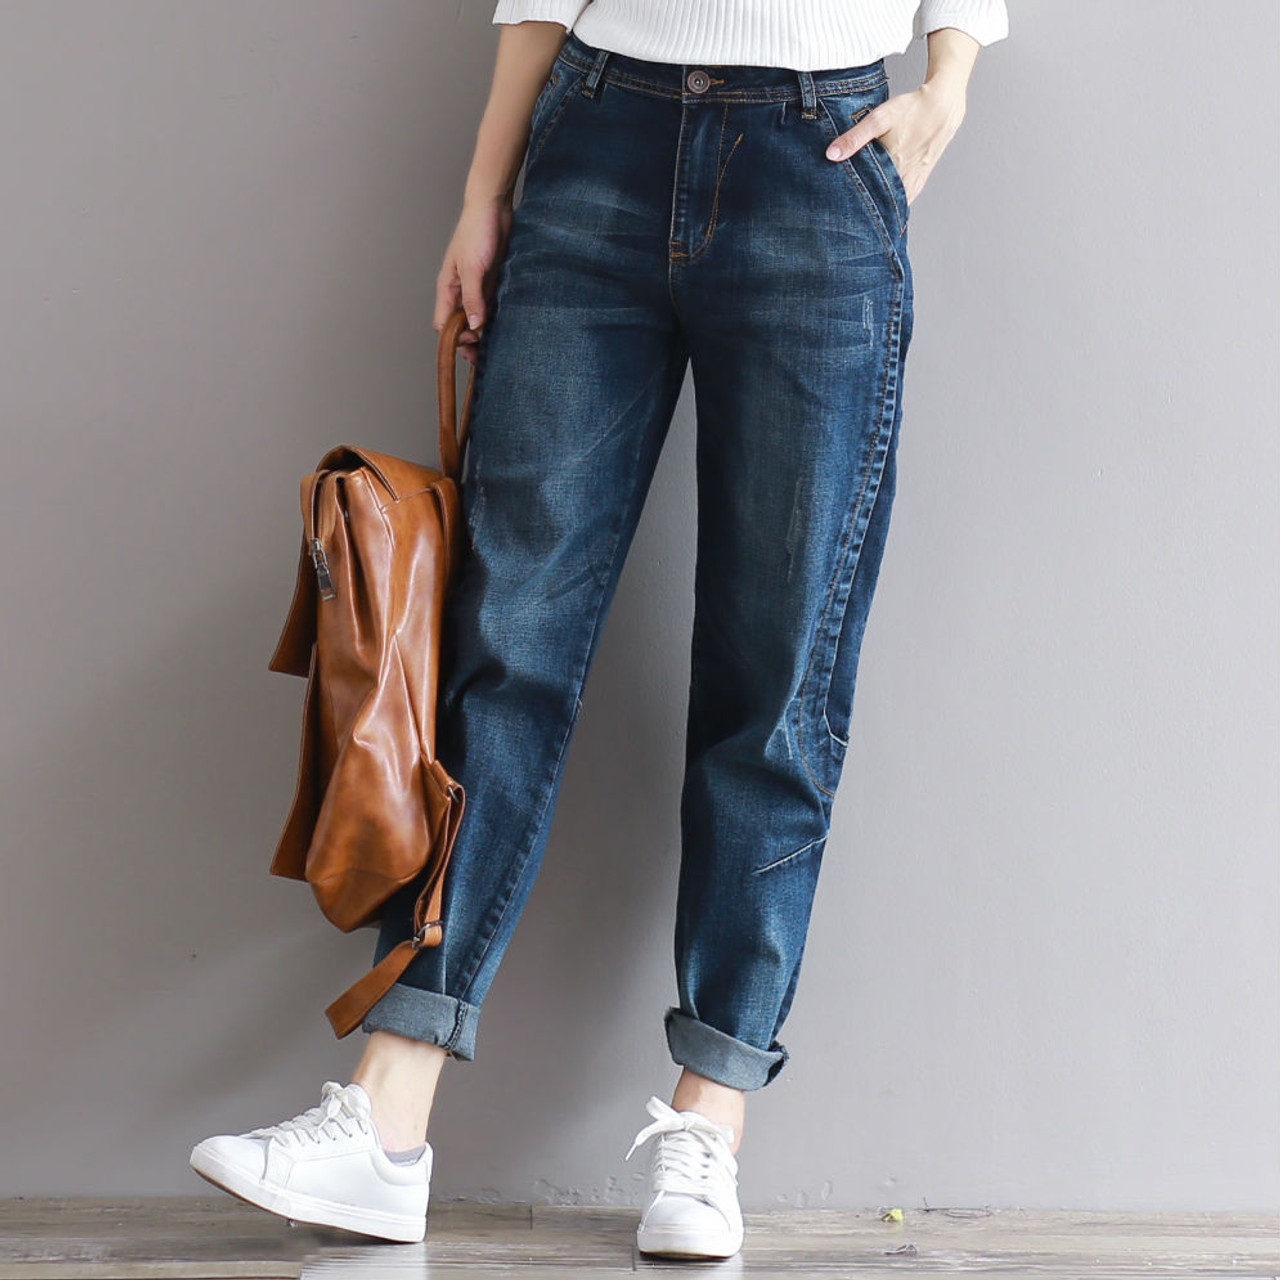 Easy ways to rock denim jeans like a real babe – The SHOE SHOP.